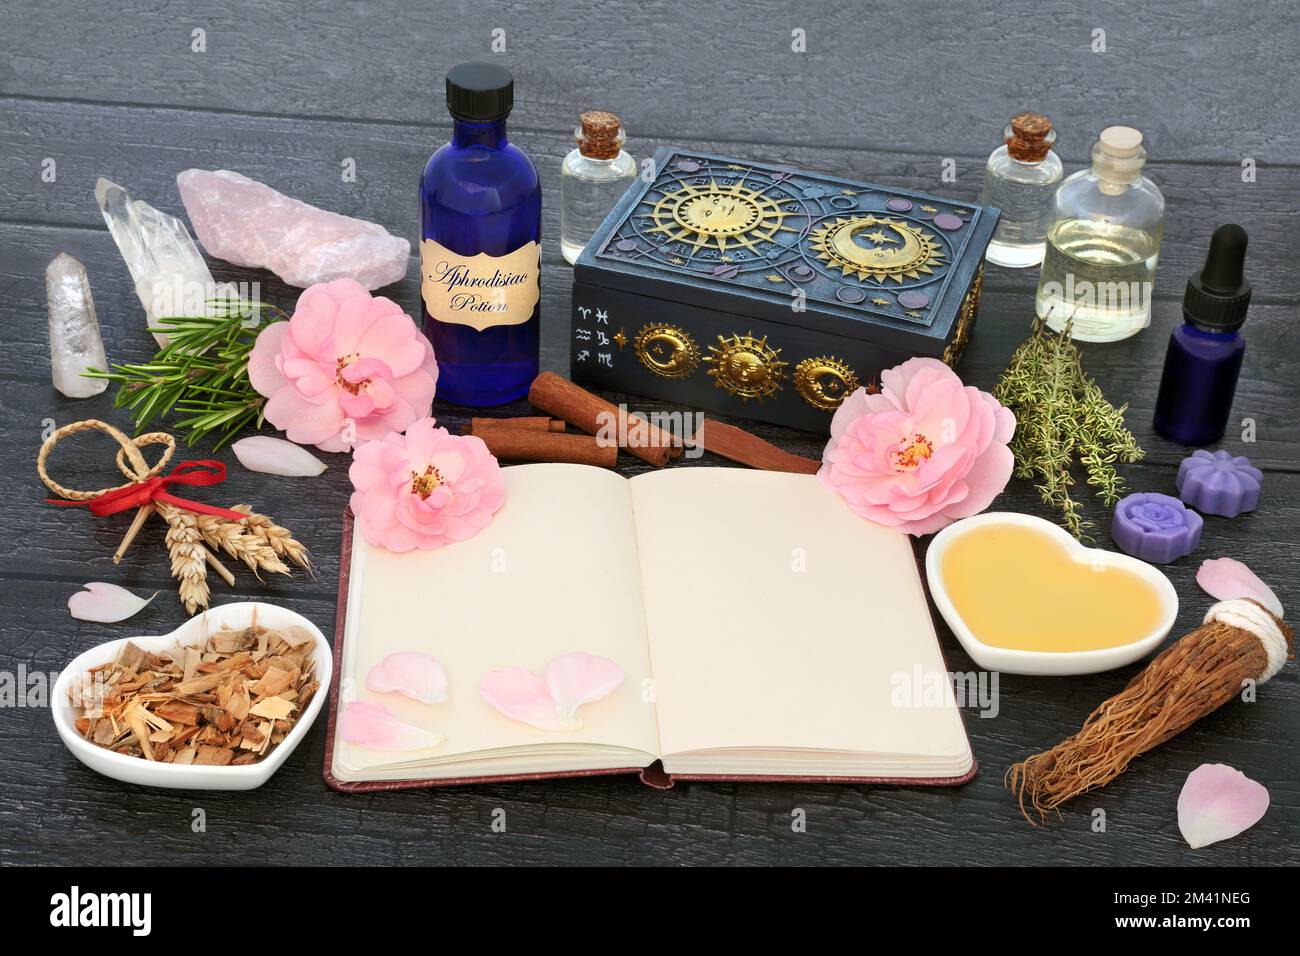 Aphrodisiac love potion recipe ingredients with magic spell notebook  herbs, rose flowers, honey, fertility corn dolly, oil, spring water and crystal. Stock Photo